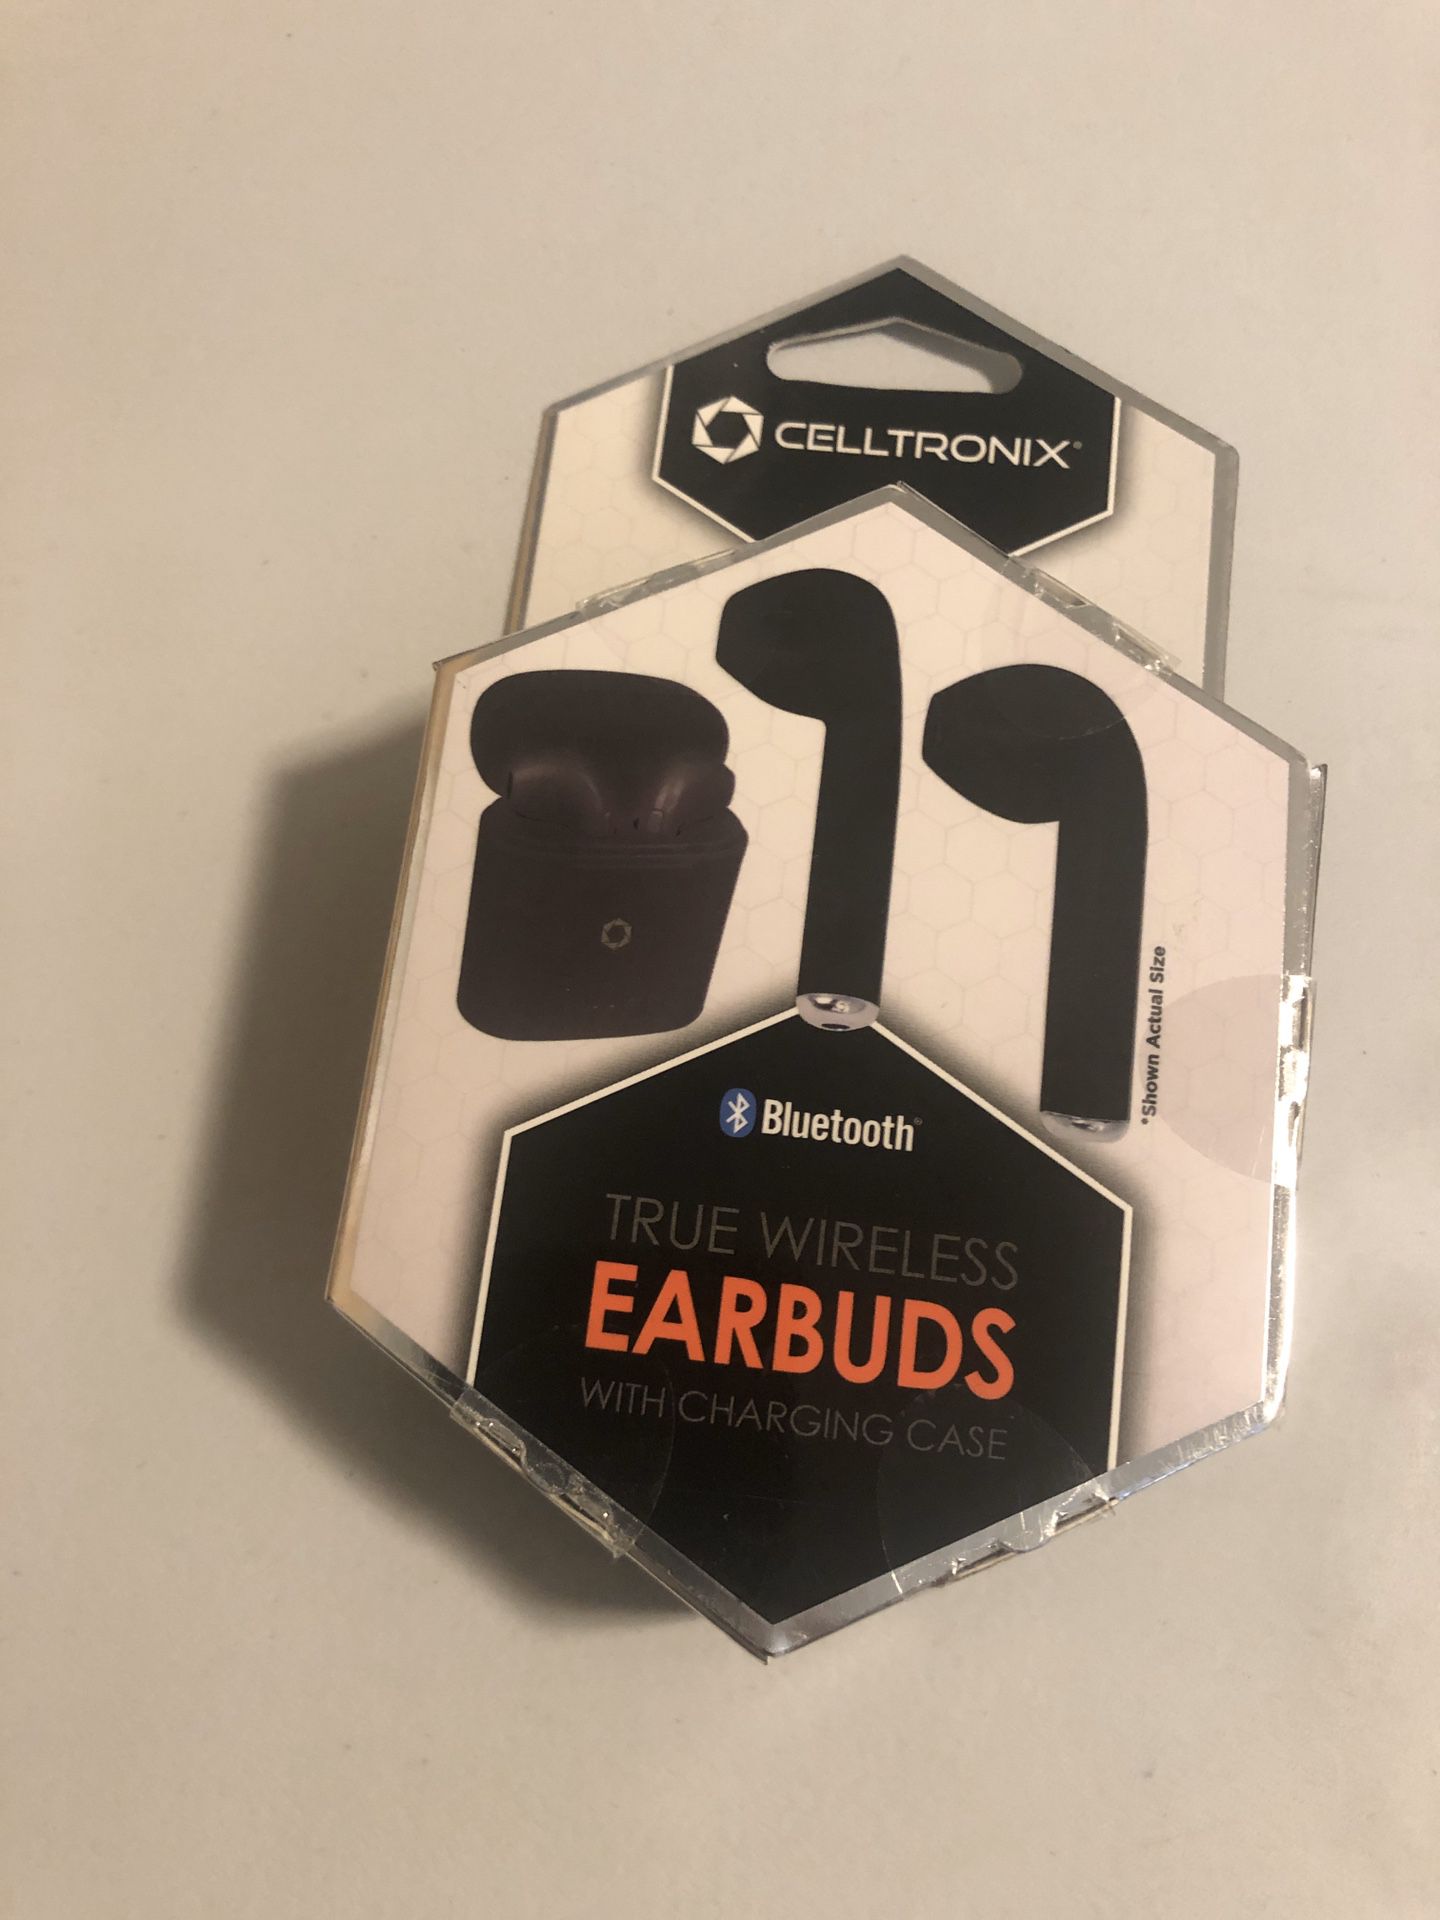 Brand new True wireless earbuds with charging case